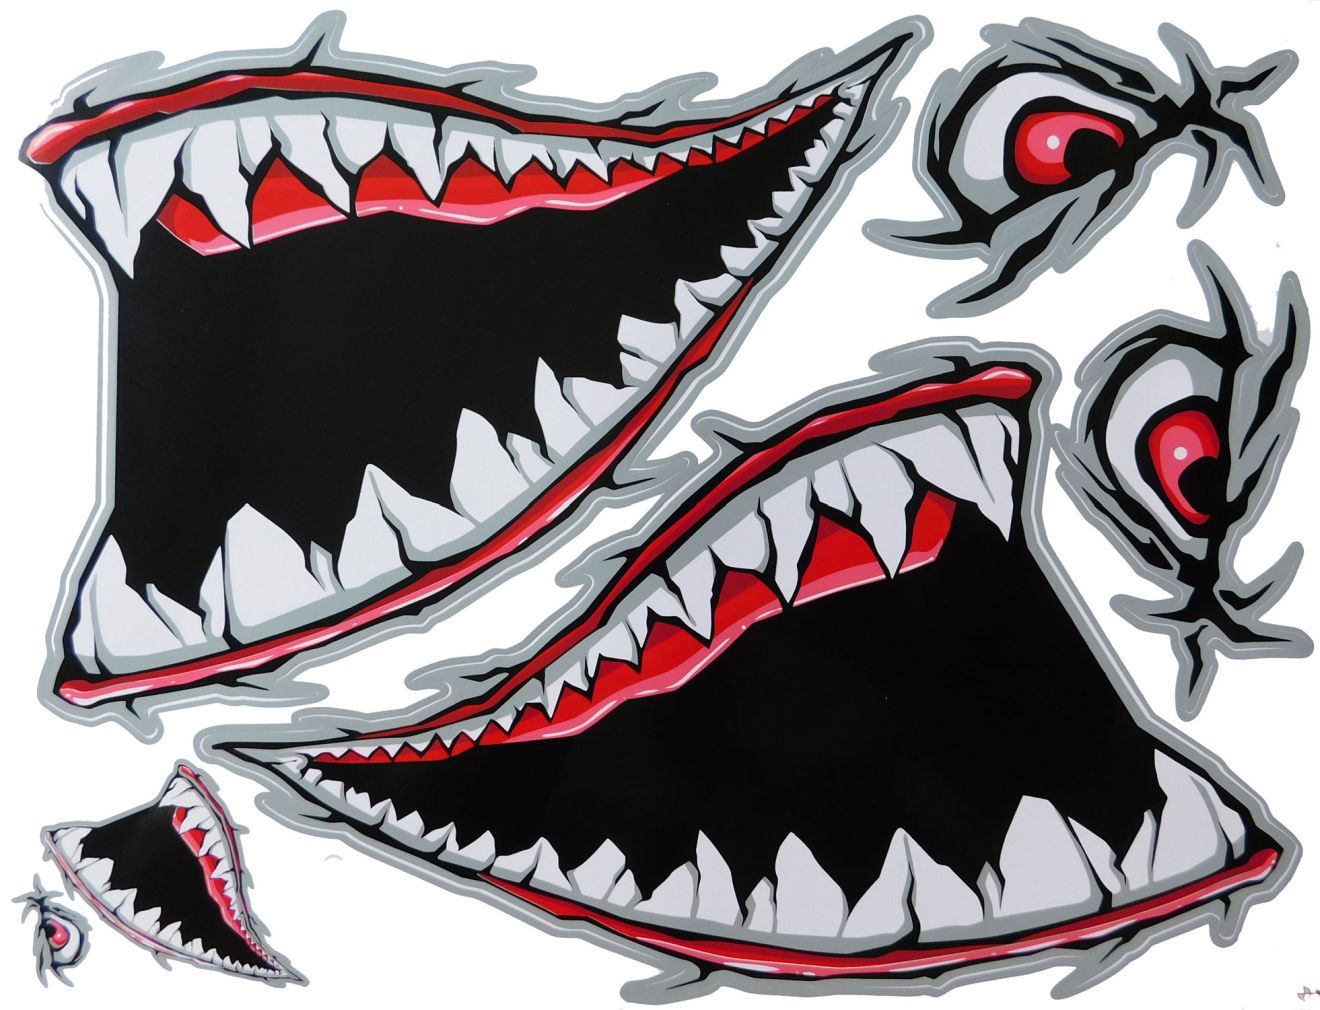 BIG SIZE shark mouth pharynx gullet teeth red sticker motorcycle scooter skateboard car tuning model building self-adhesive FSB114